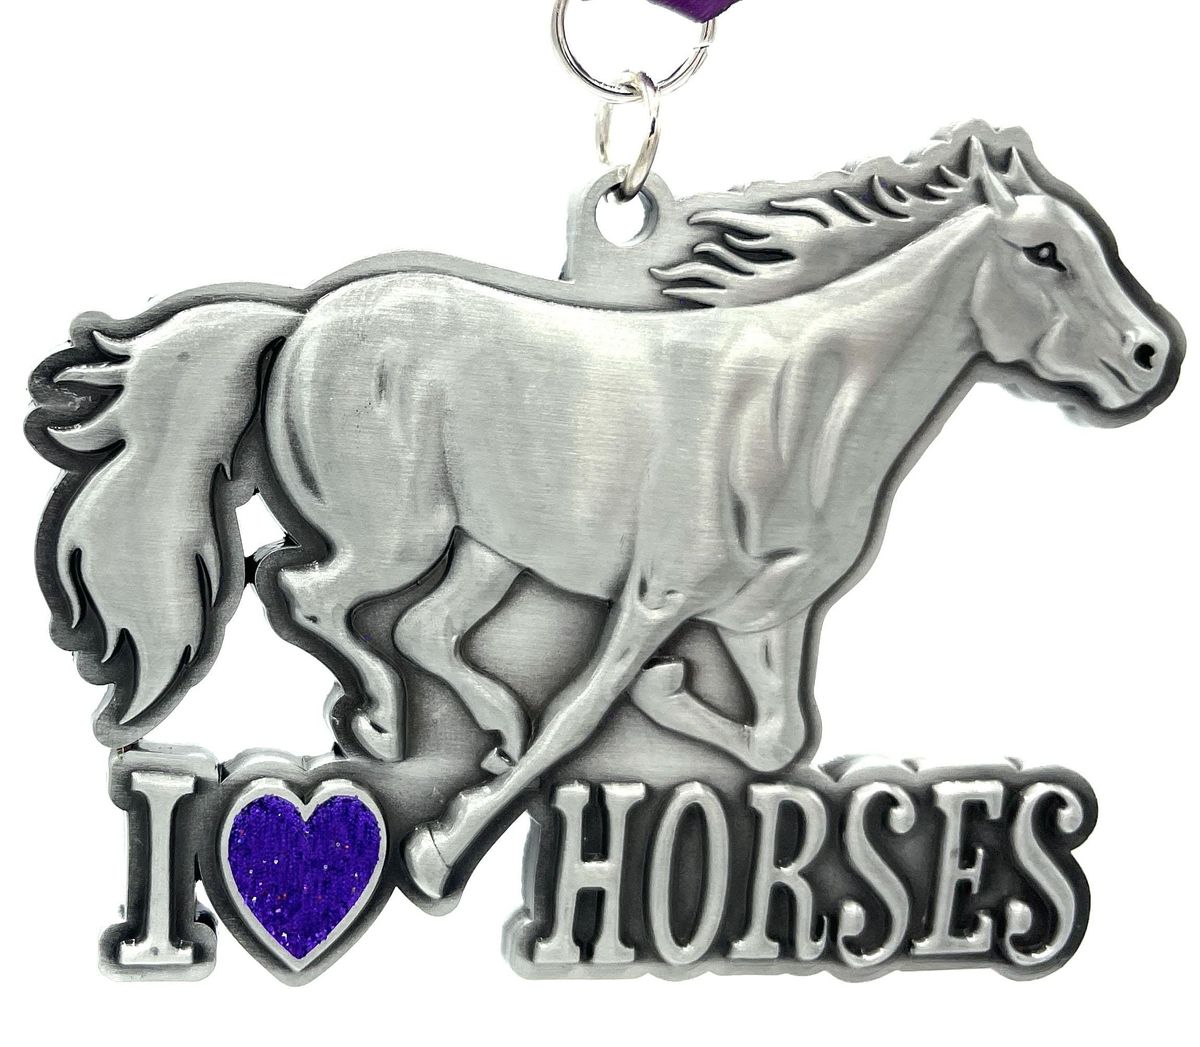 2021 I Love Horses 1M 5K 10K 13.1 26.2-Participate from Home. Save $5 Now!